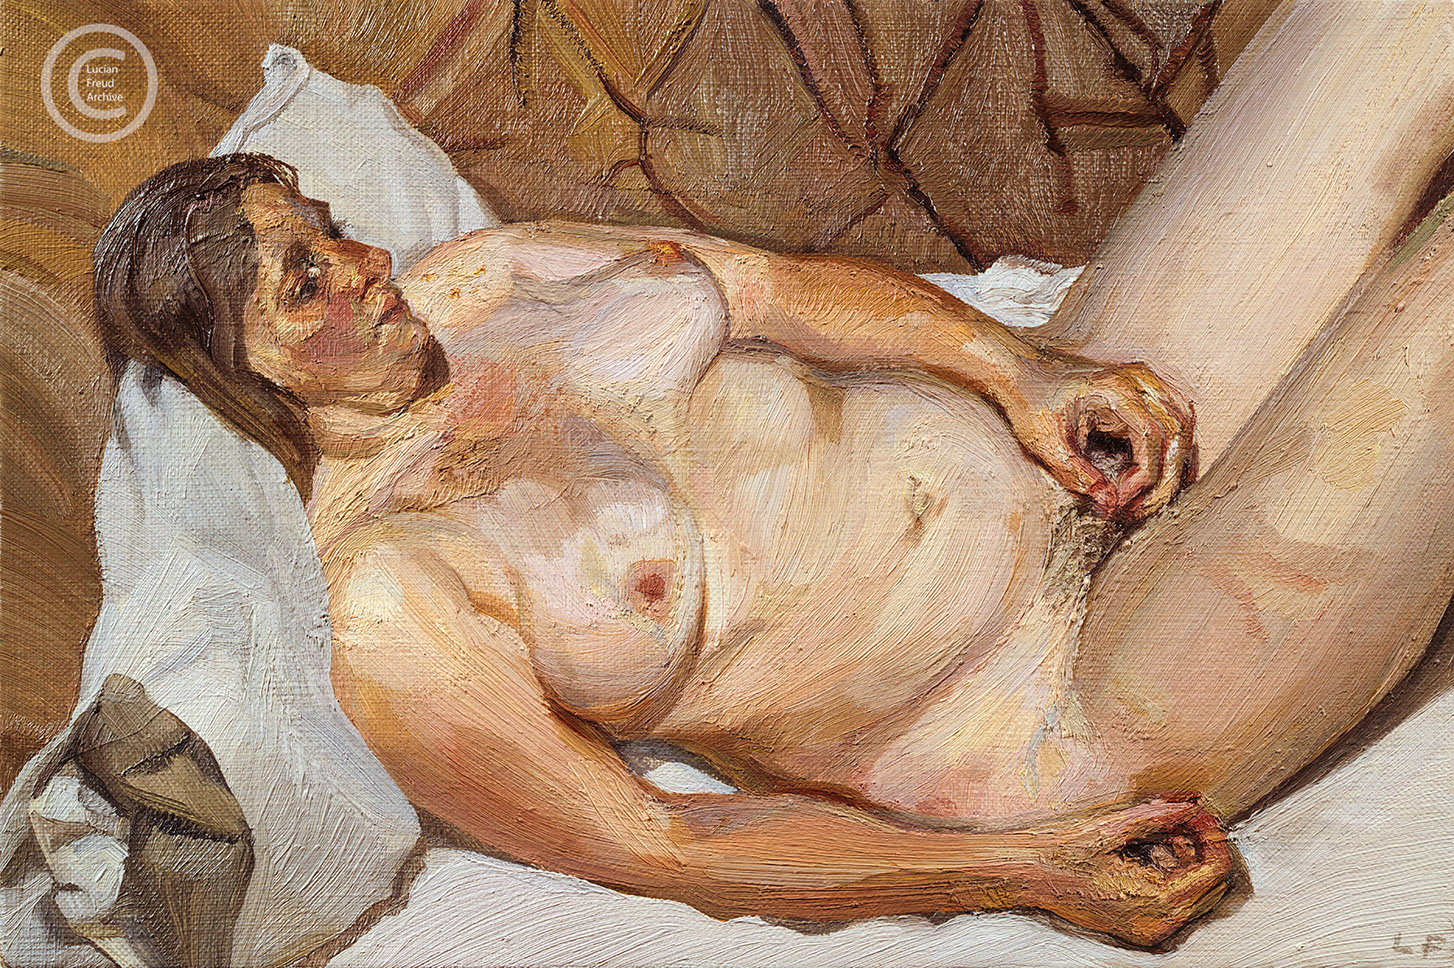 Naked woman on a sofa, 1984 - 1985 - Lucian Freud 